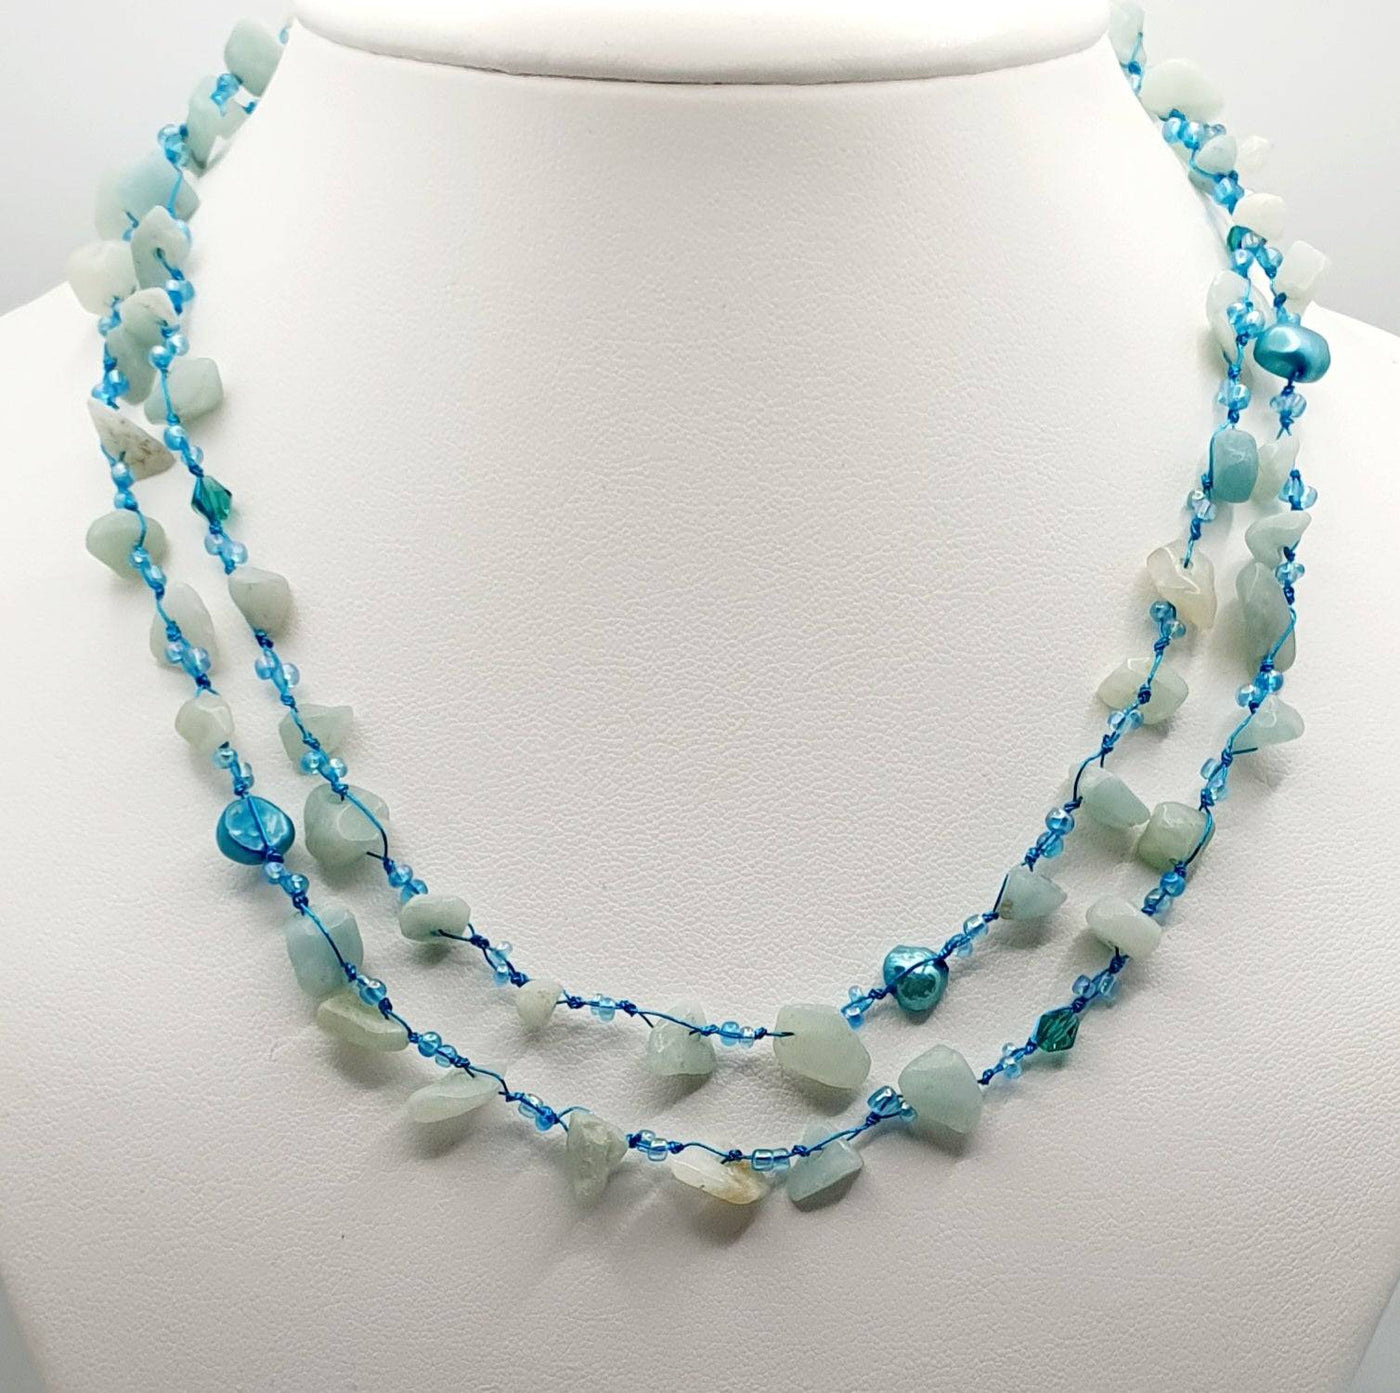 Japanese Silk Cord Necklace With Dyed Freshwater Pearls & Amazonite 150cm